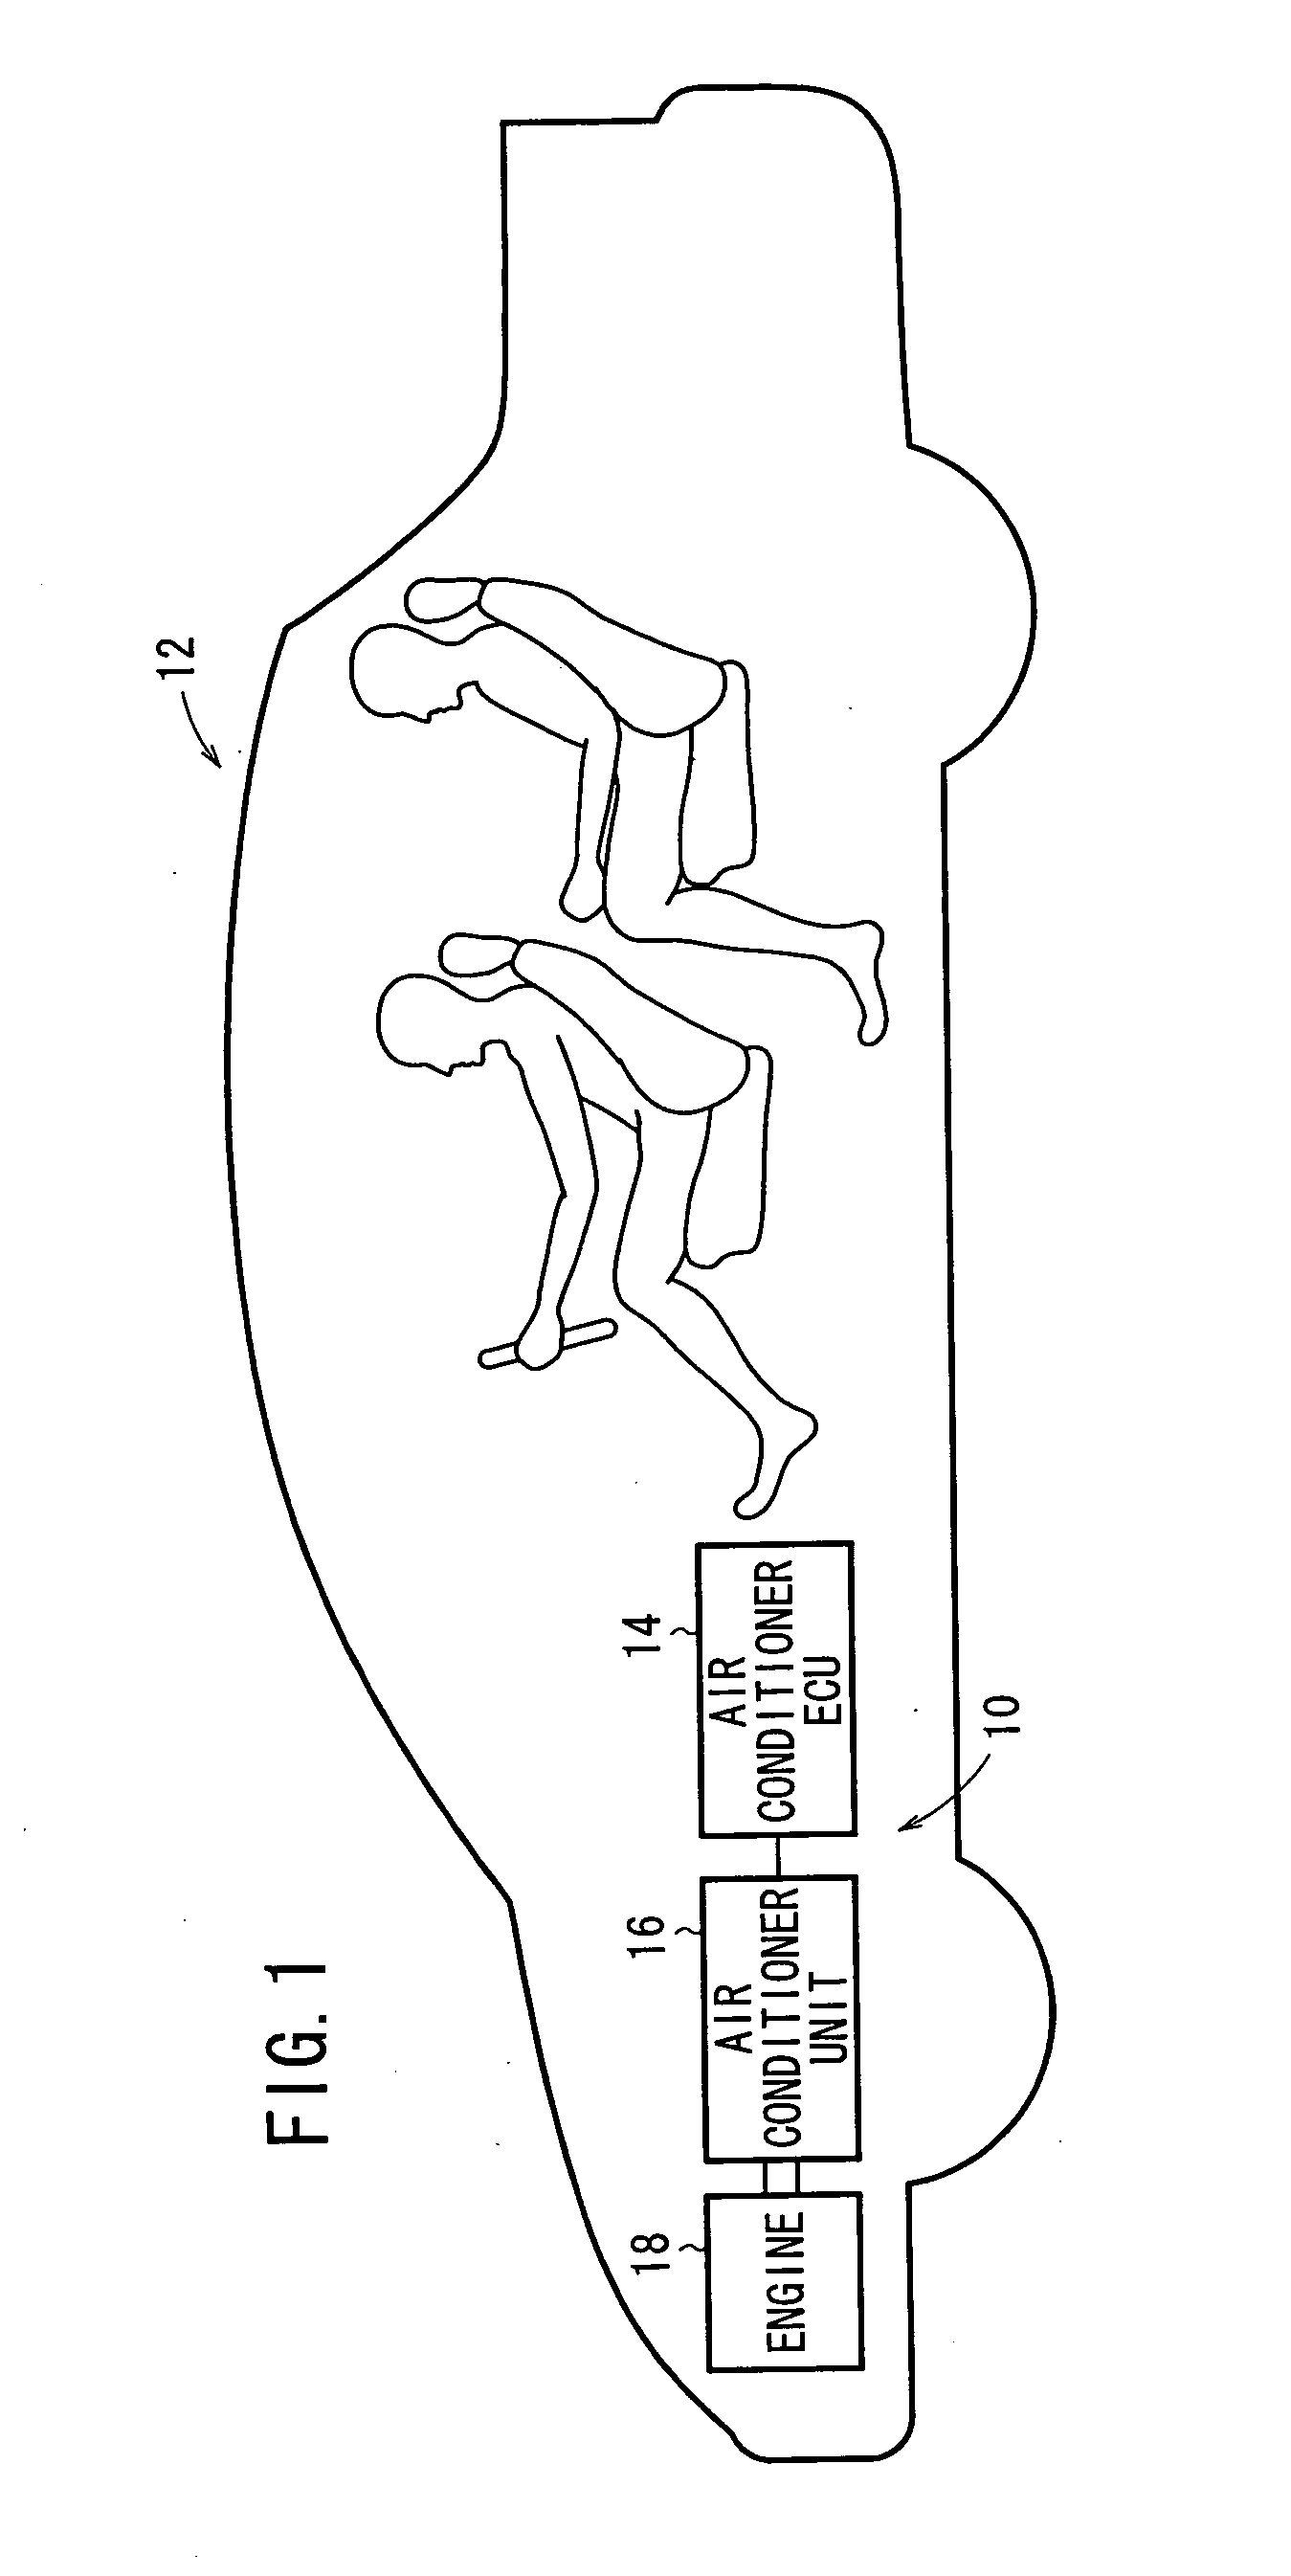 Air conditioner for vehicles and method of controlling same